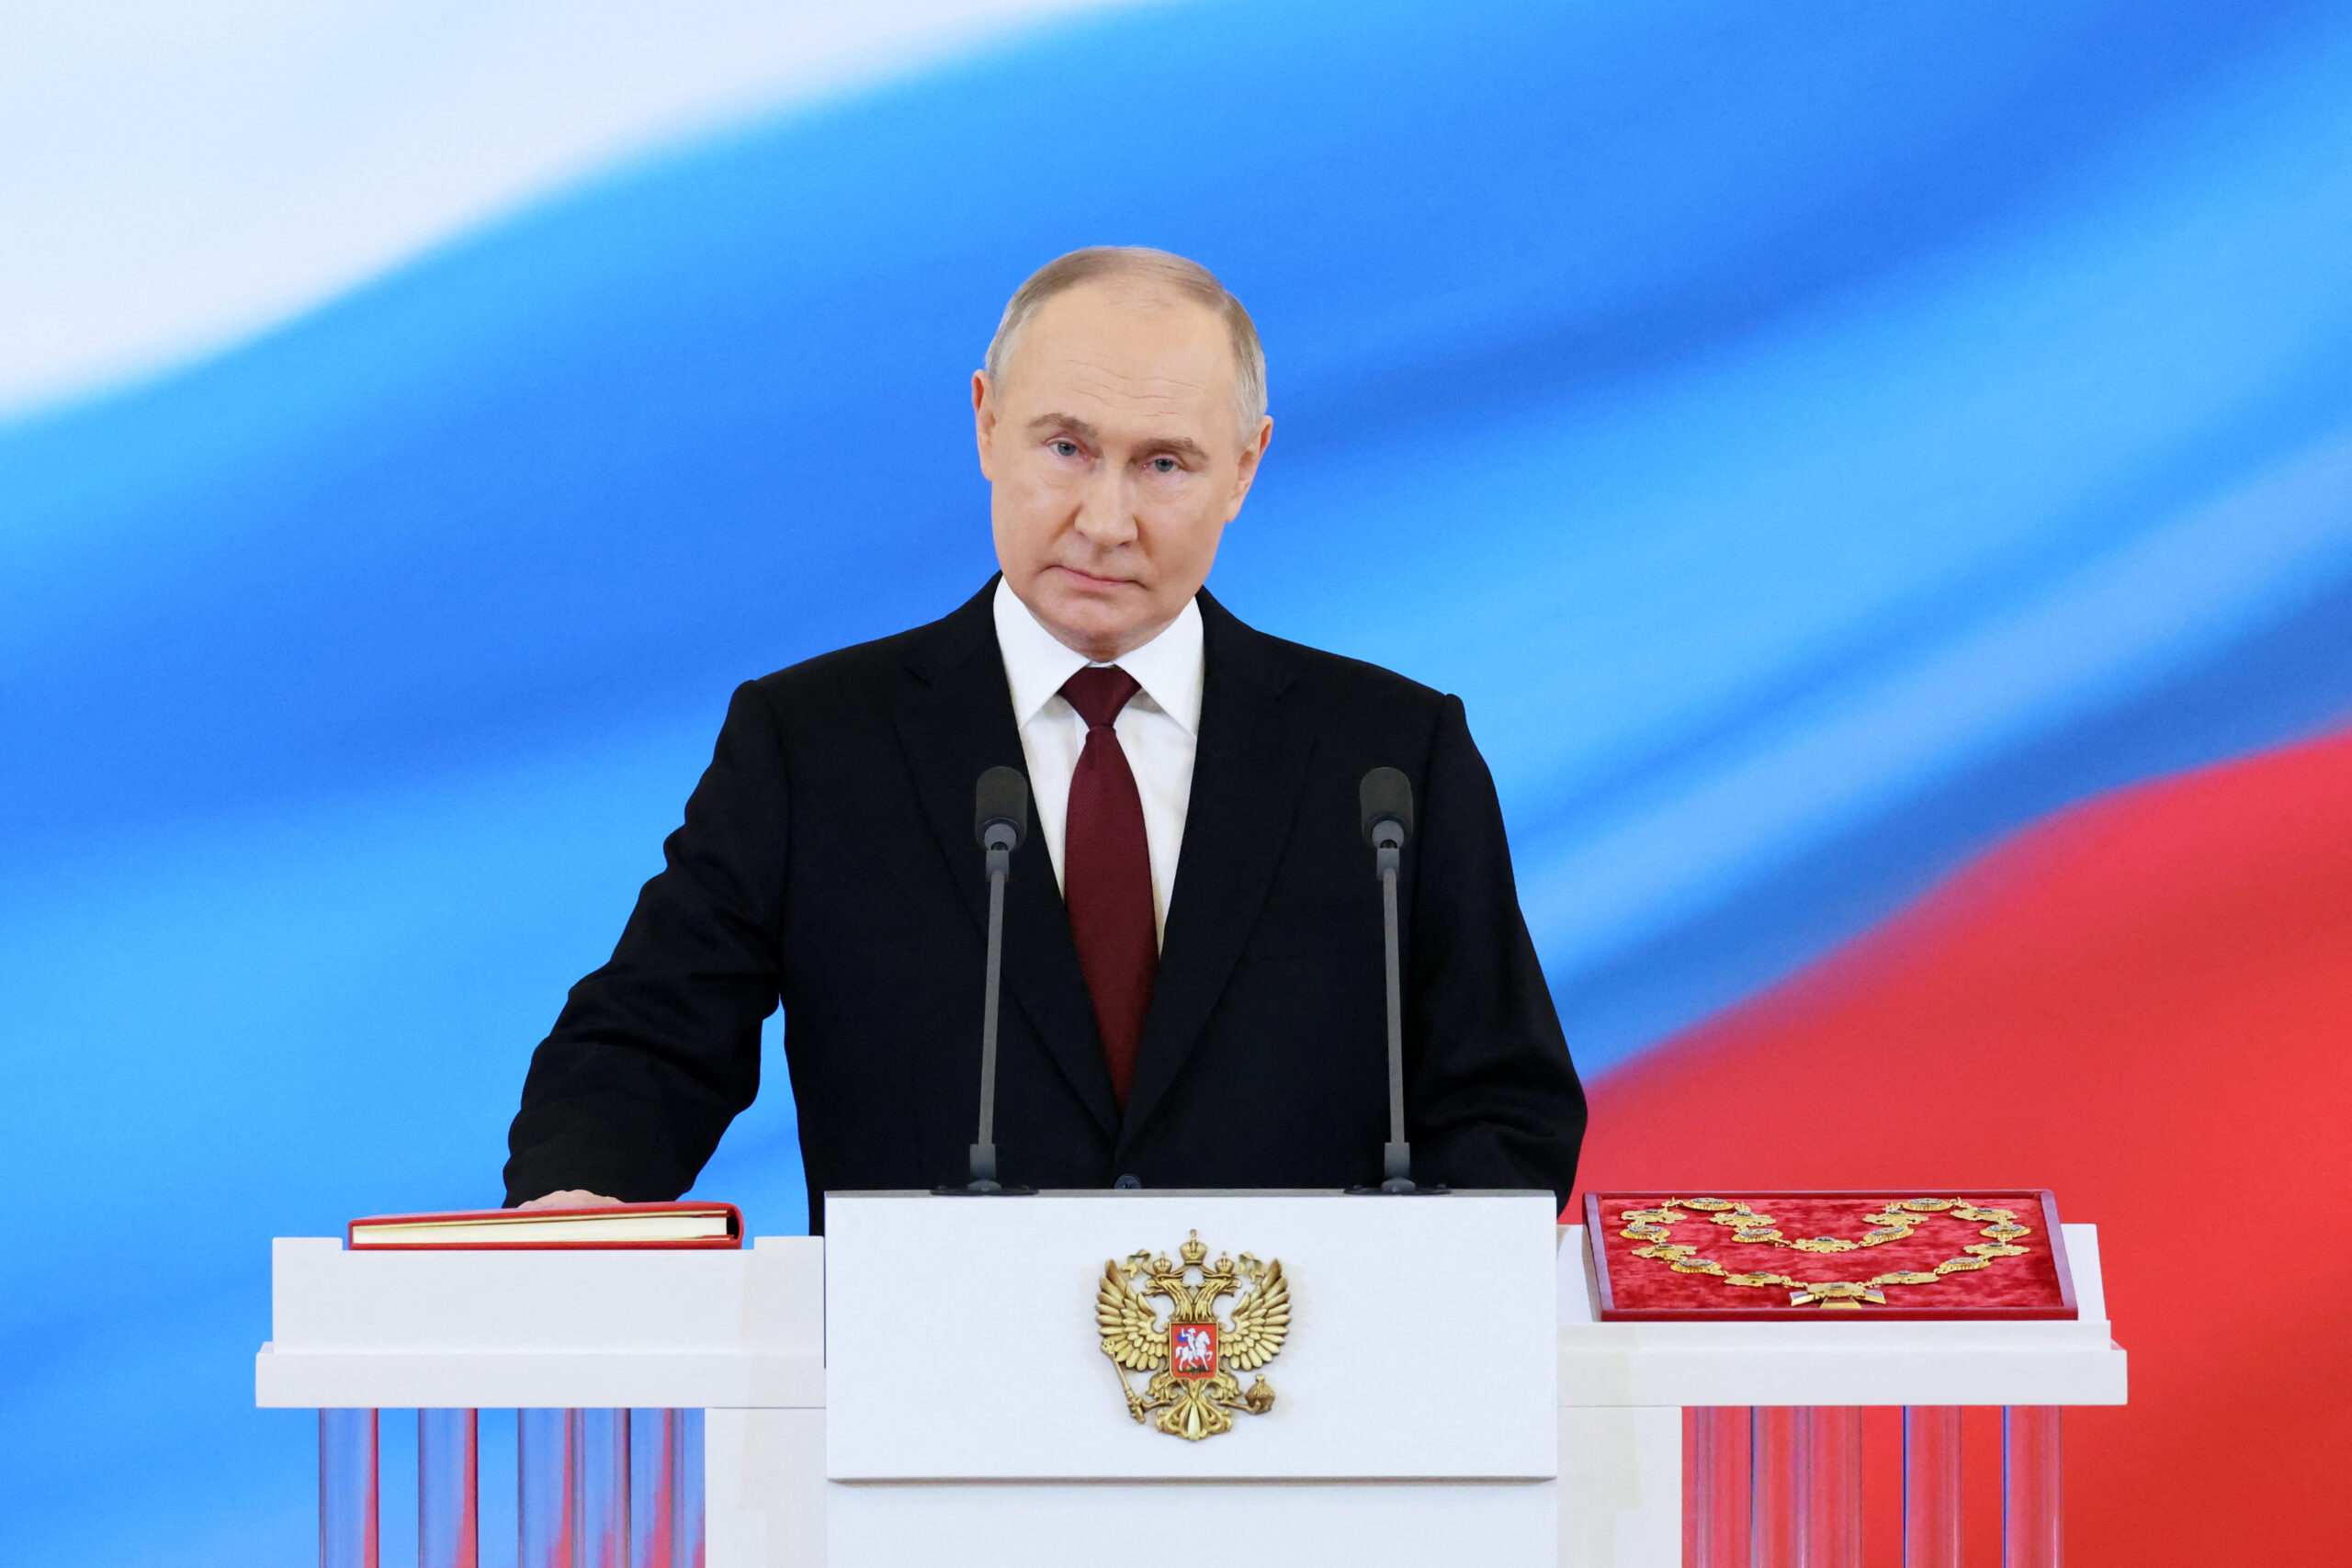 Russian president-elect Vladimir Putin takes the oath of office during a ceremony at the Kremlin in Moscow on May 7, 2024. <em>Photo by ALEXANDER KAZAKOV/POOL/AFP via Getty Images</em>